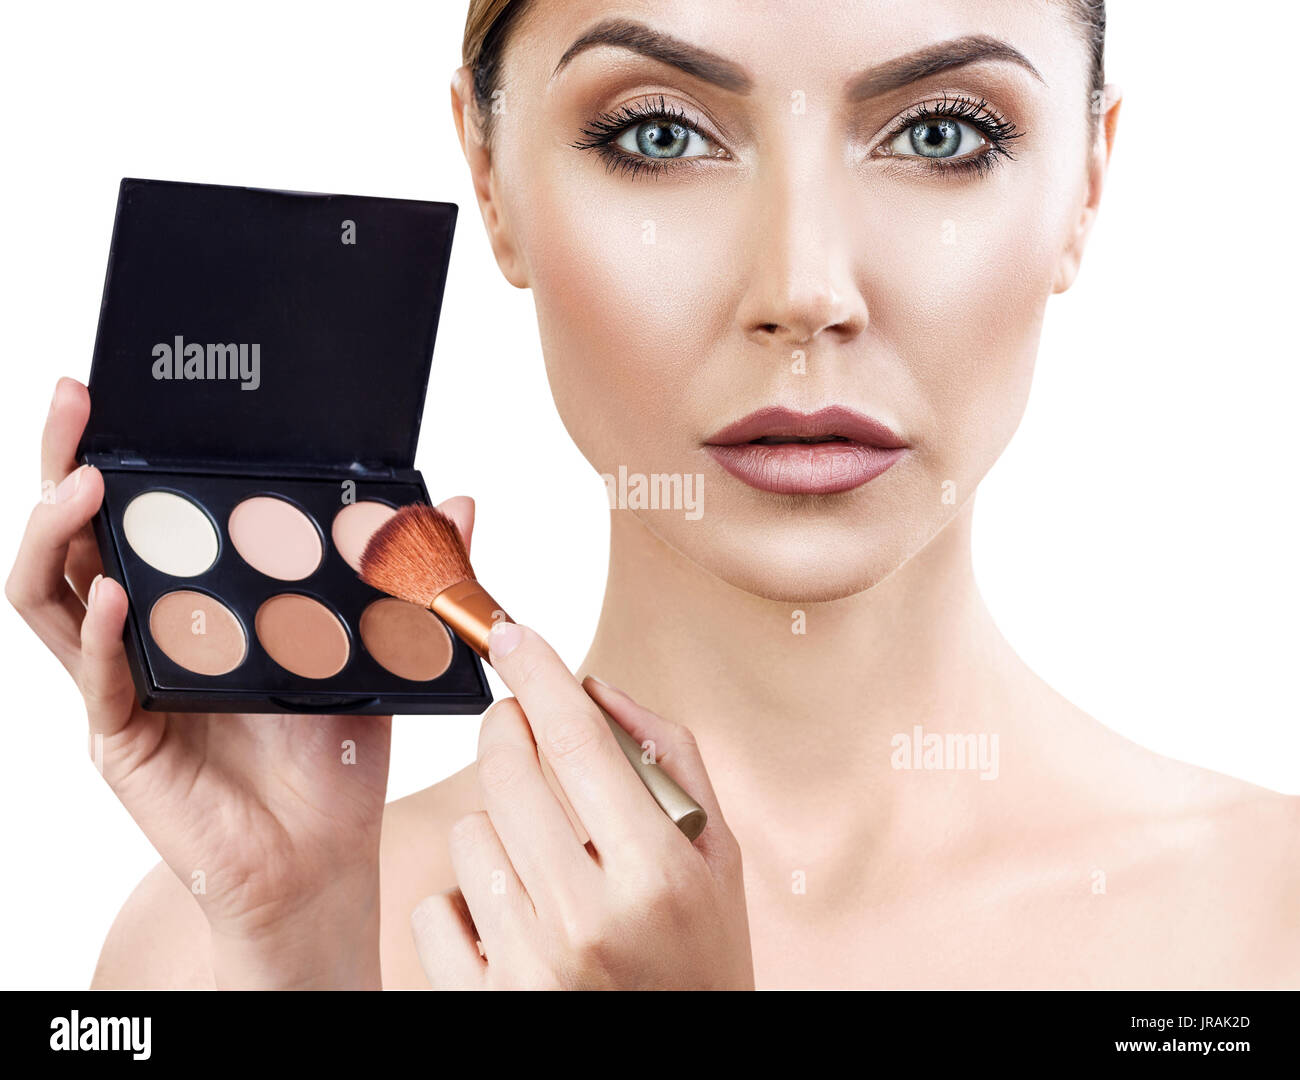 Young woman holding palette for contouring face. Stock Photo